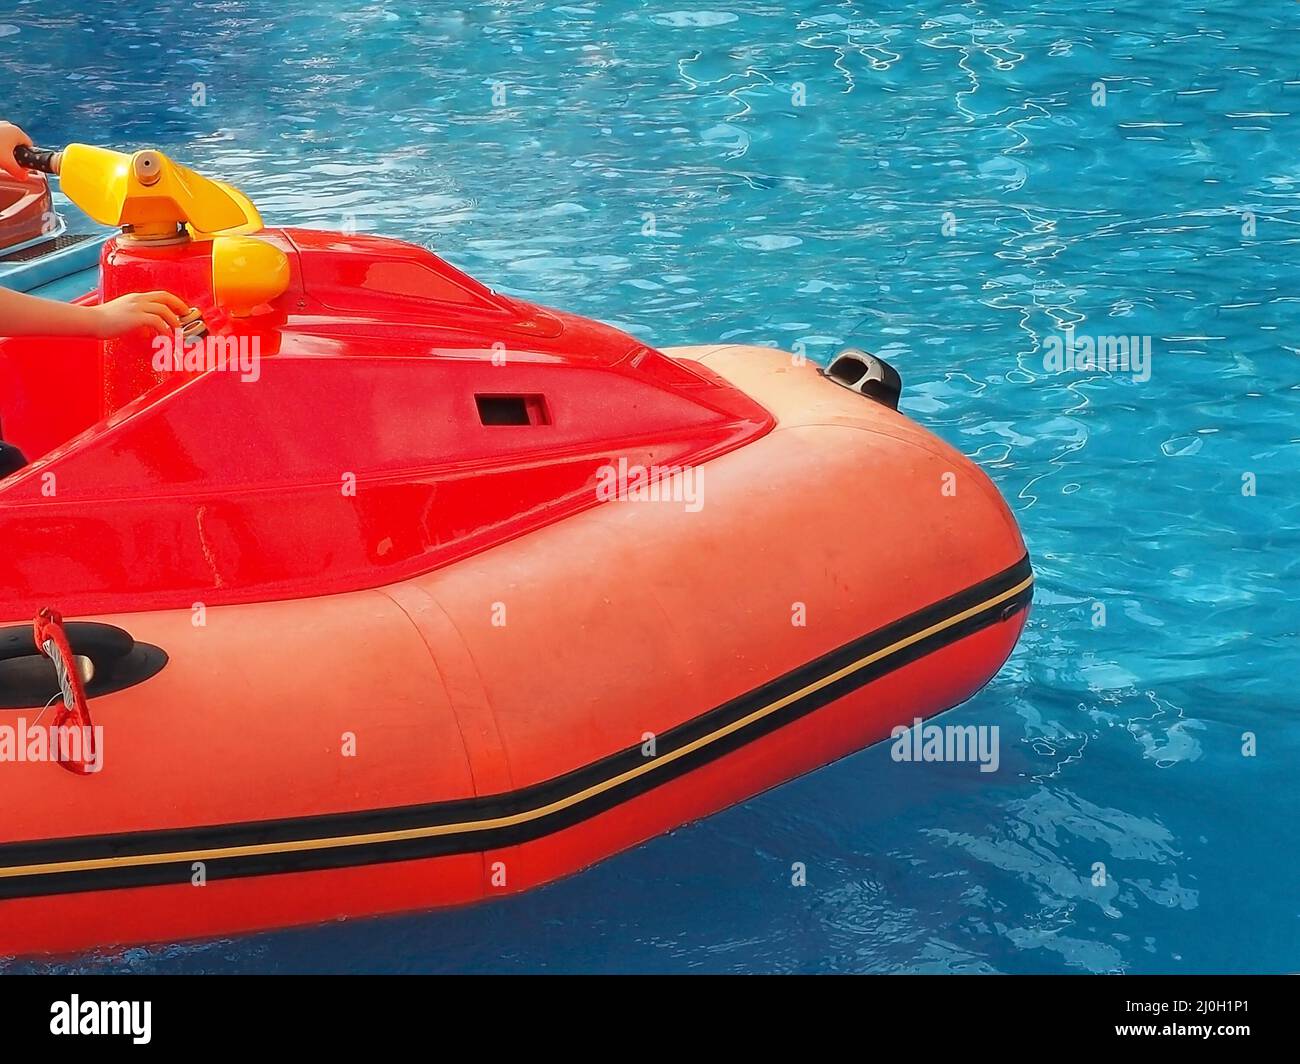 Fragment of a children's red inflatable boat floating in a blue outdoor pool Stock Photo